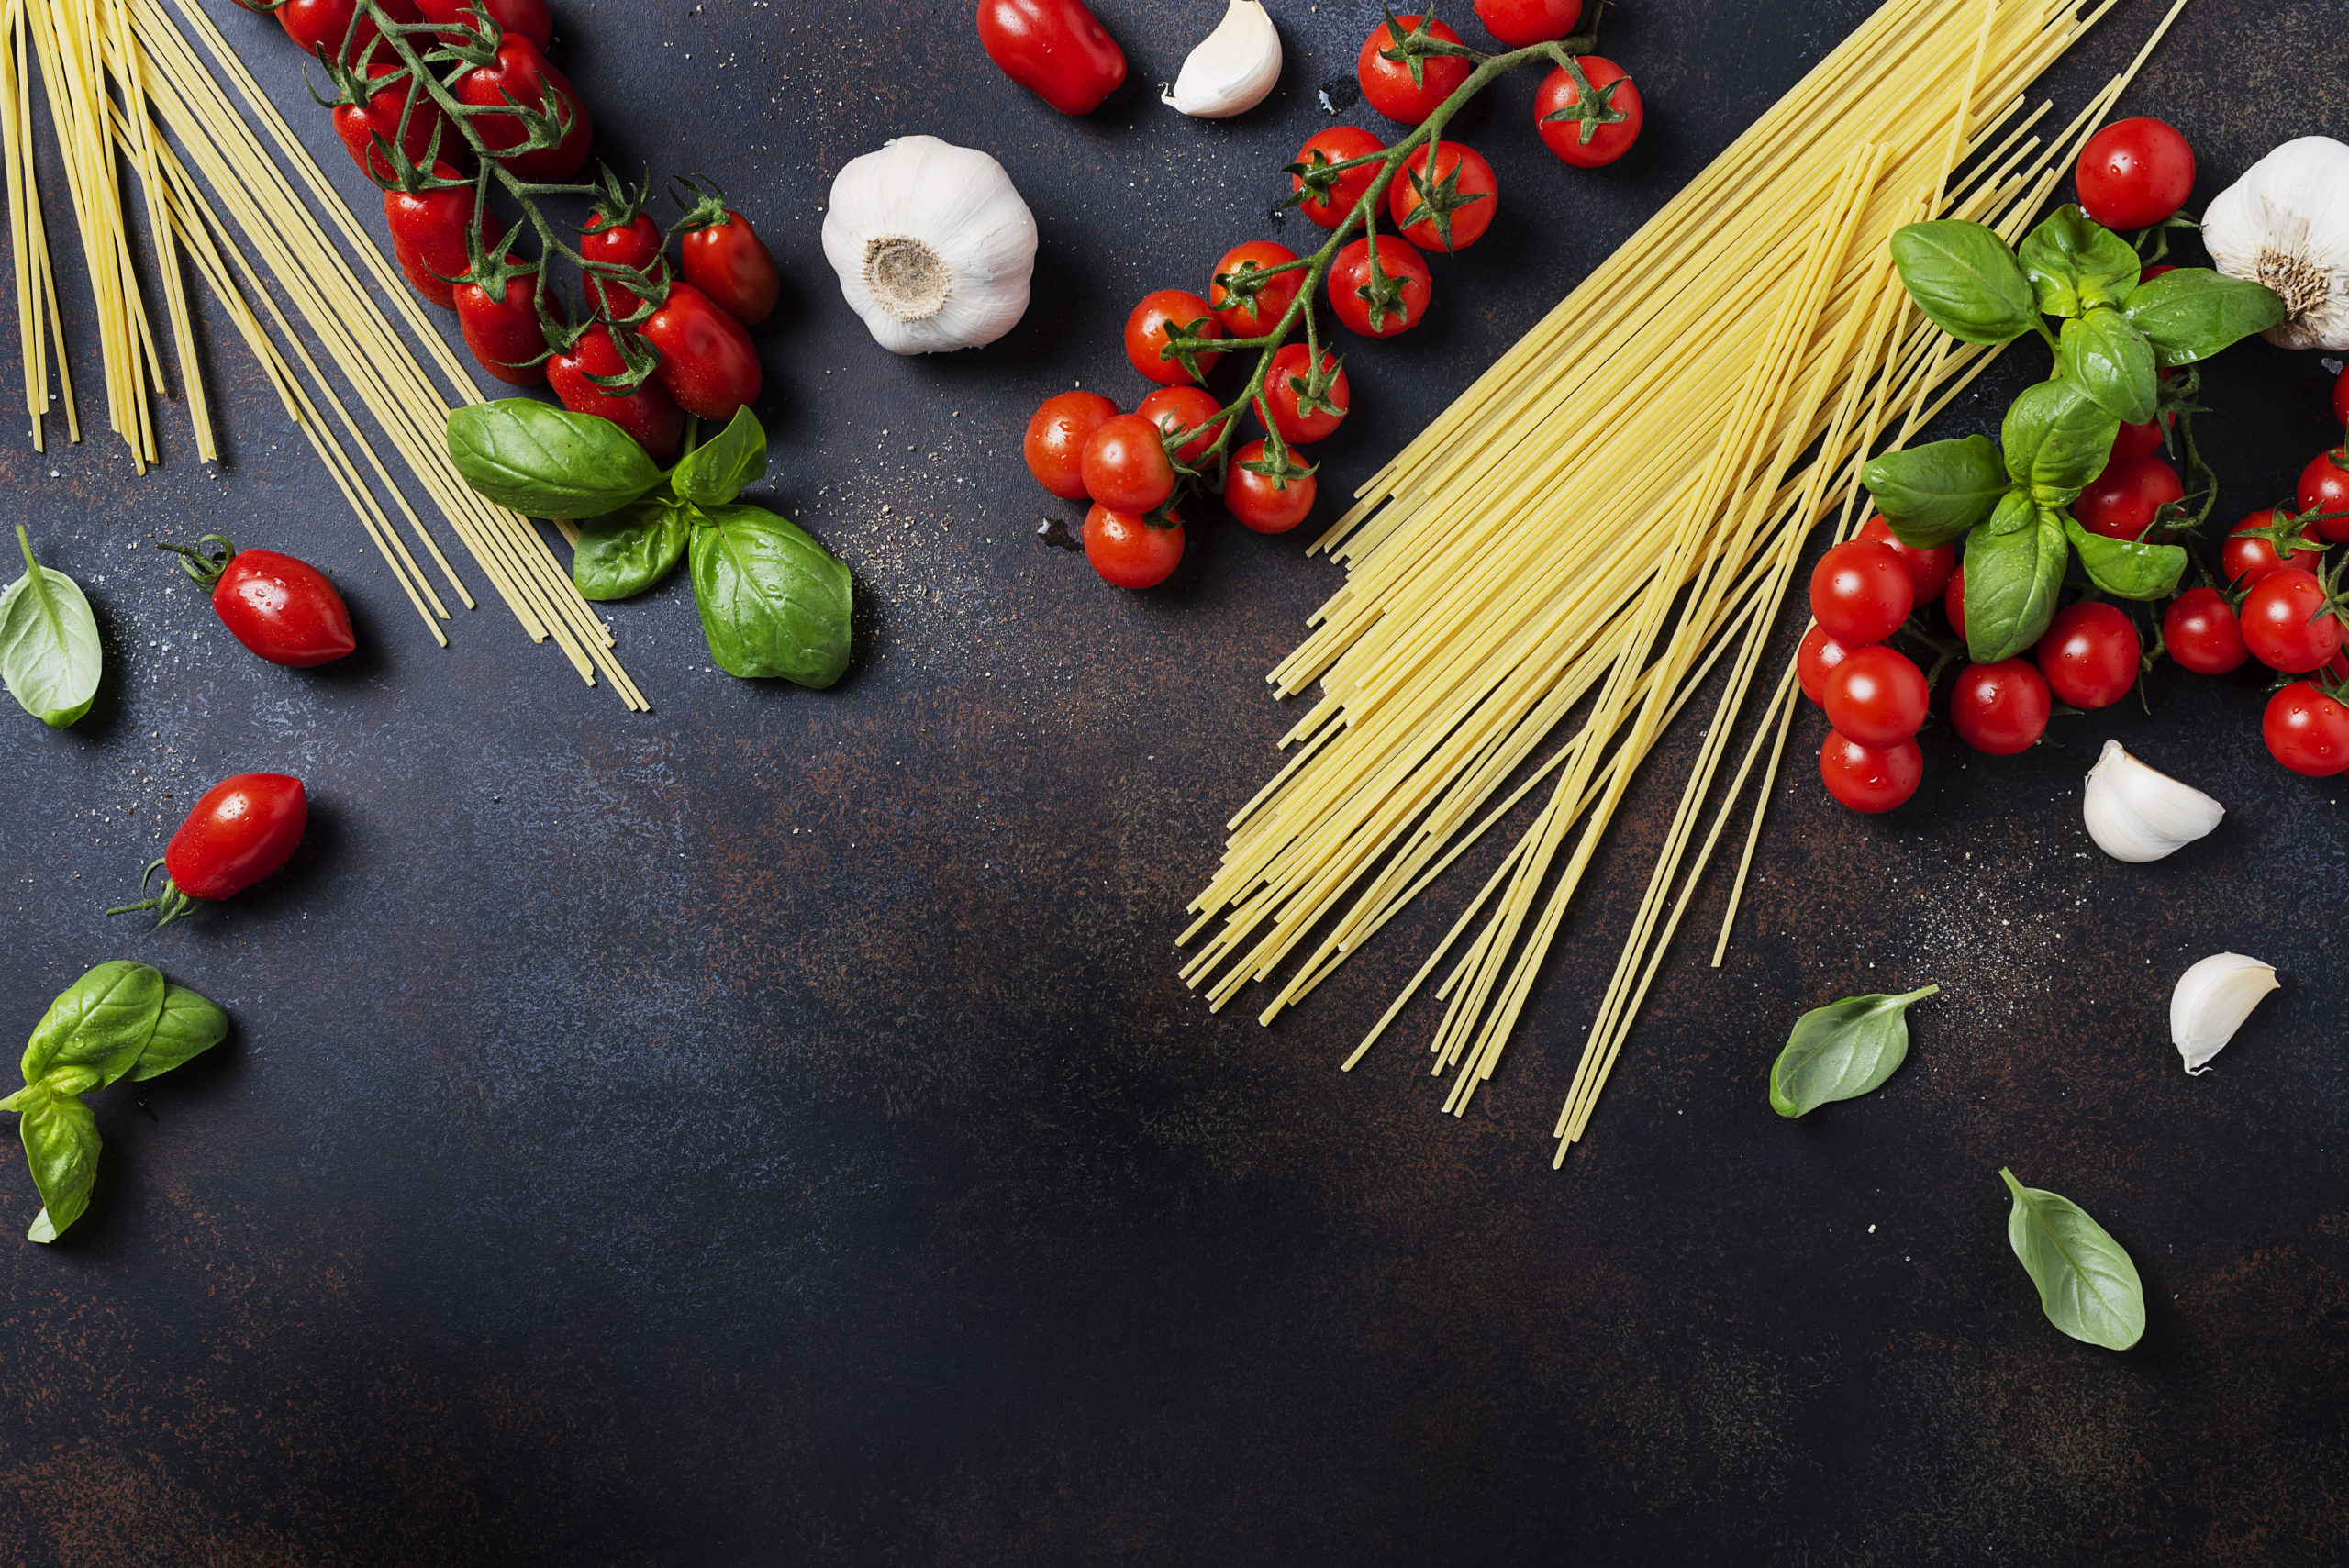 Ingredients for cooking italian pasta: spaghetti, tomato, basil and garlic on the black table. Top view image with a copy space